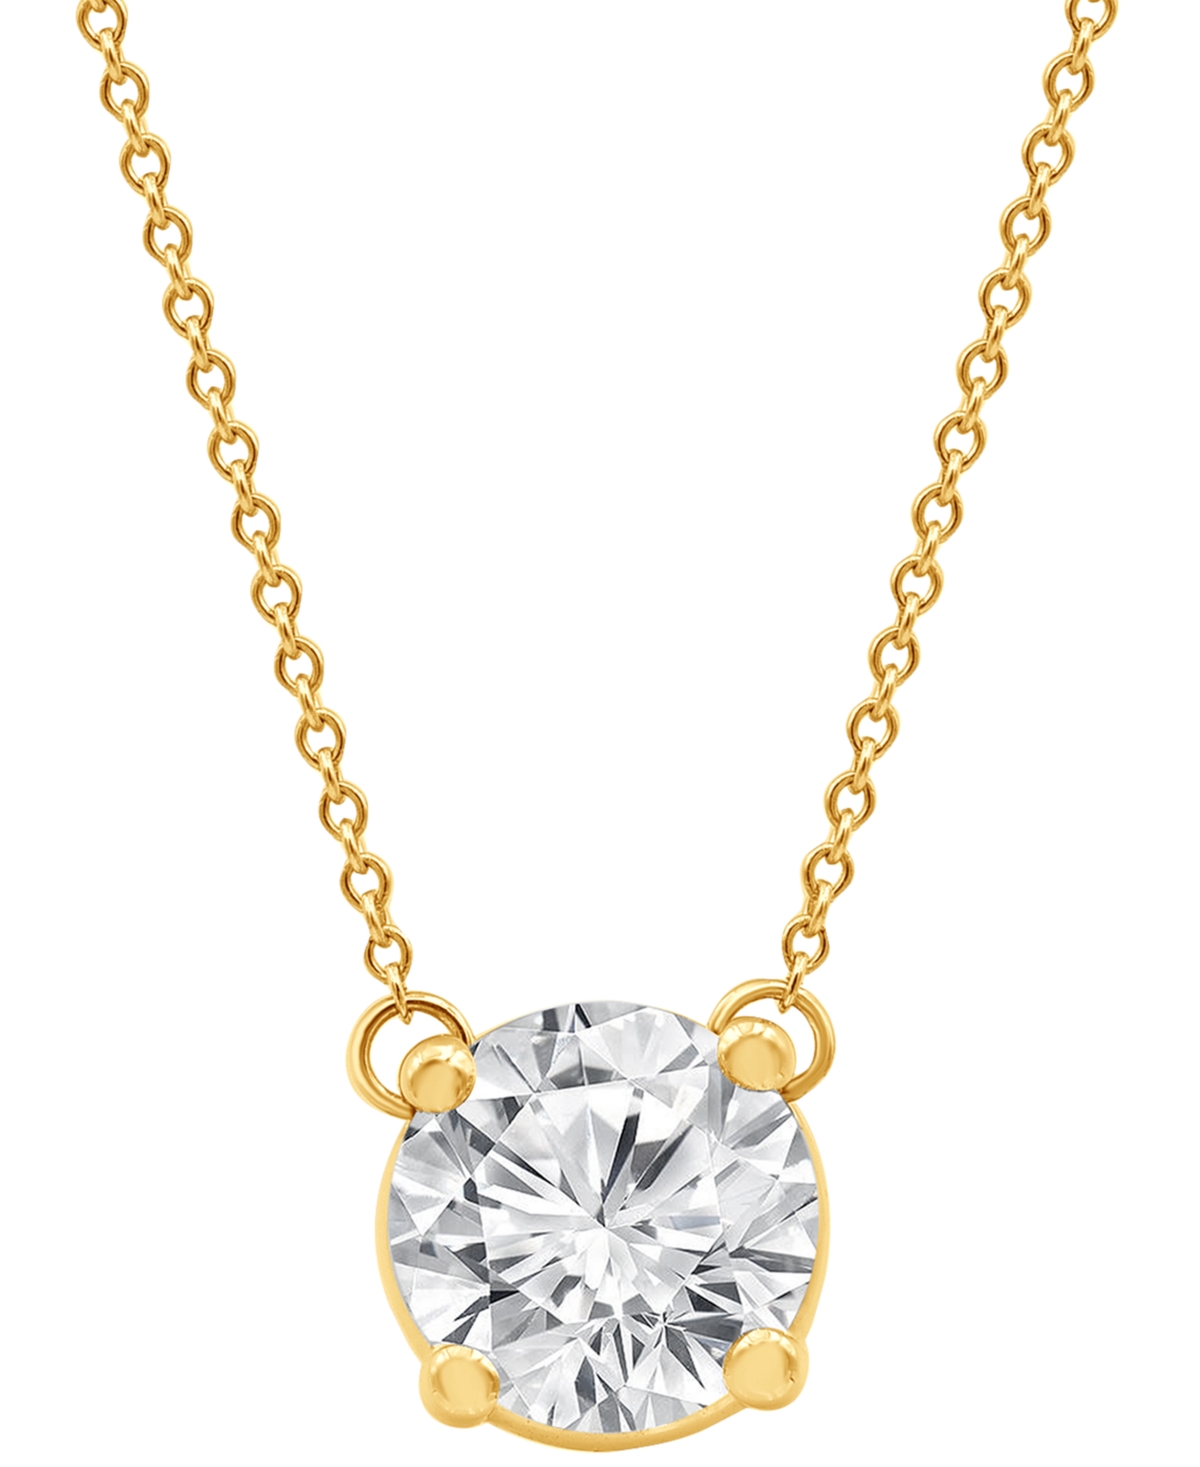 Certified Lab Grown Diamond Solitaire Pendant 18" Necklace (2-1/4 ct. t.w.) in 14k Gold - White Gold